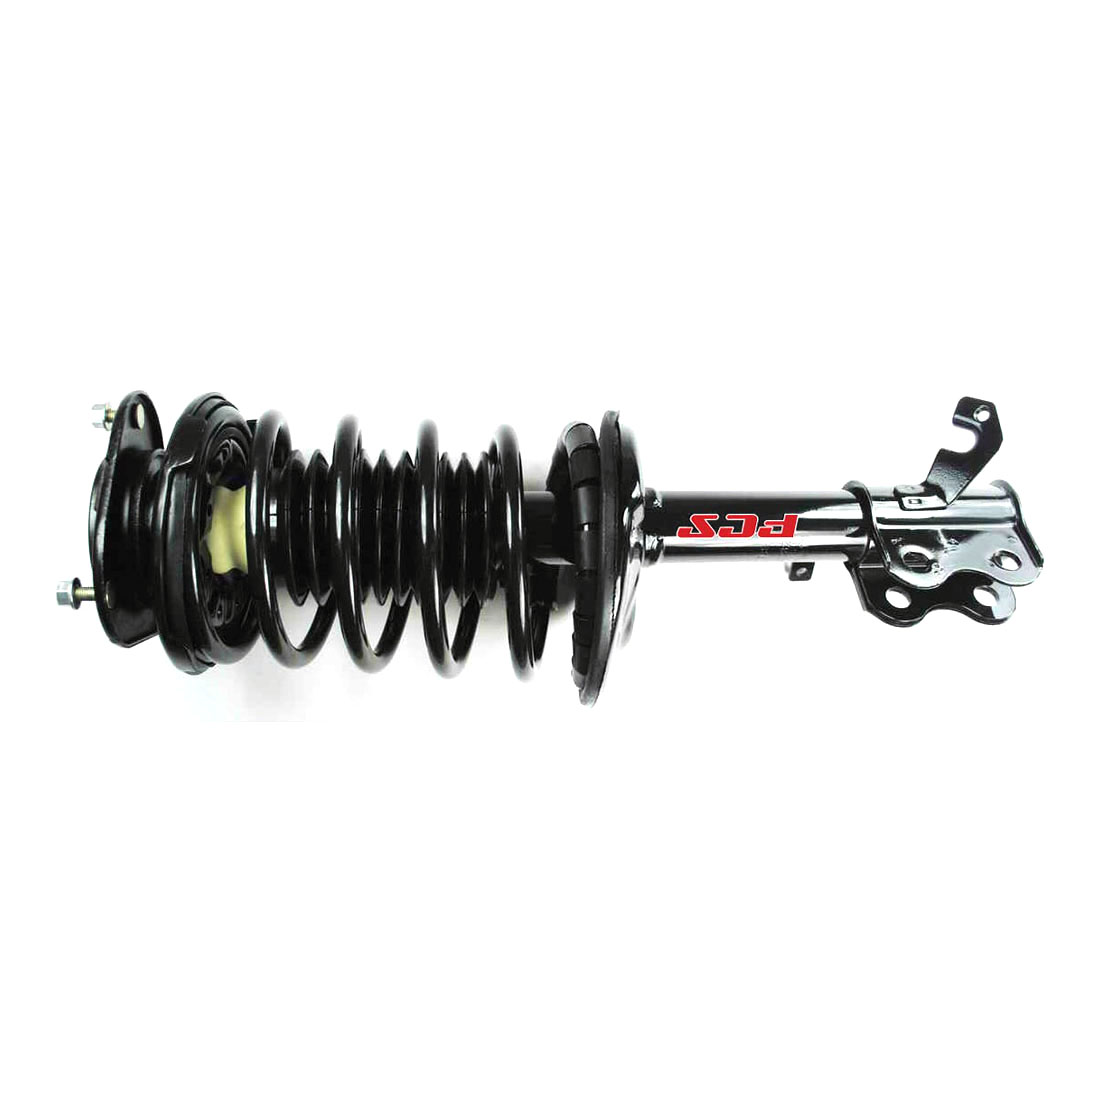 FCS Shocks And Struts Assembly Complete Coil Spring Suspension For Chevrolet Prizm 1998 1999 2000 2001 2002 For Toyota Corolla 1993 1994 1995 1996 1997 1998 1999 2000 2001 2002 - image 5 of 9